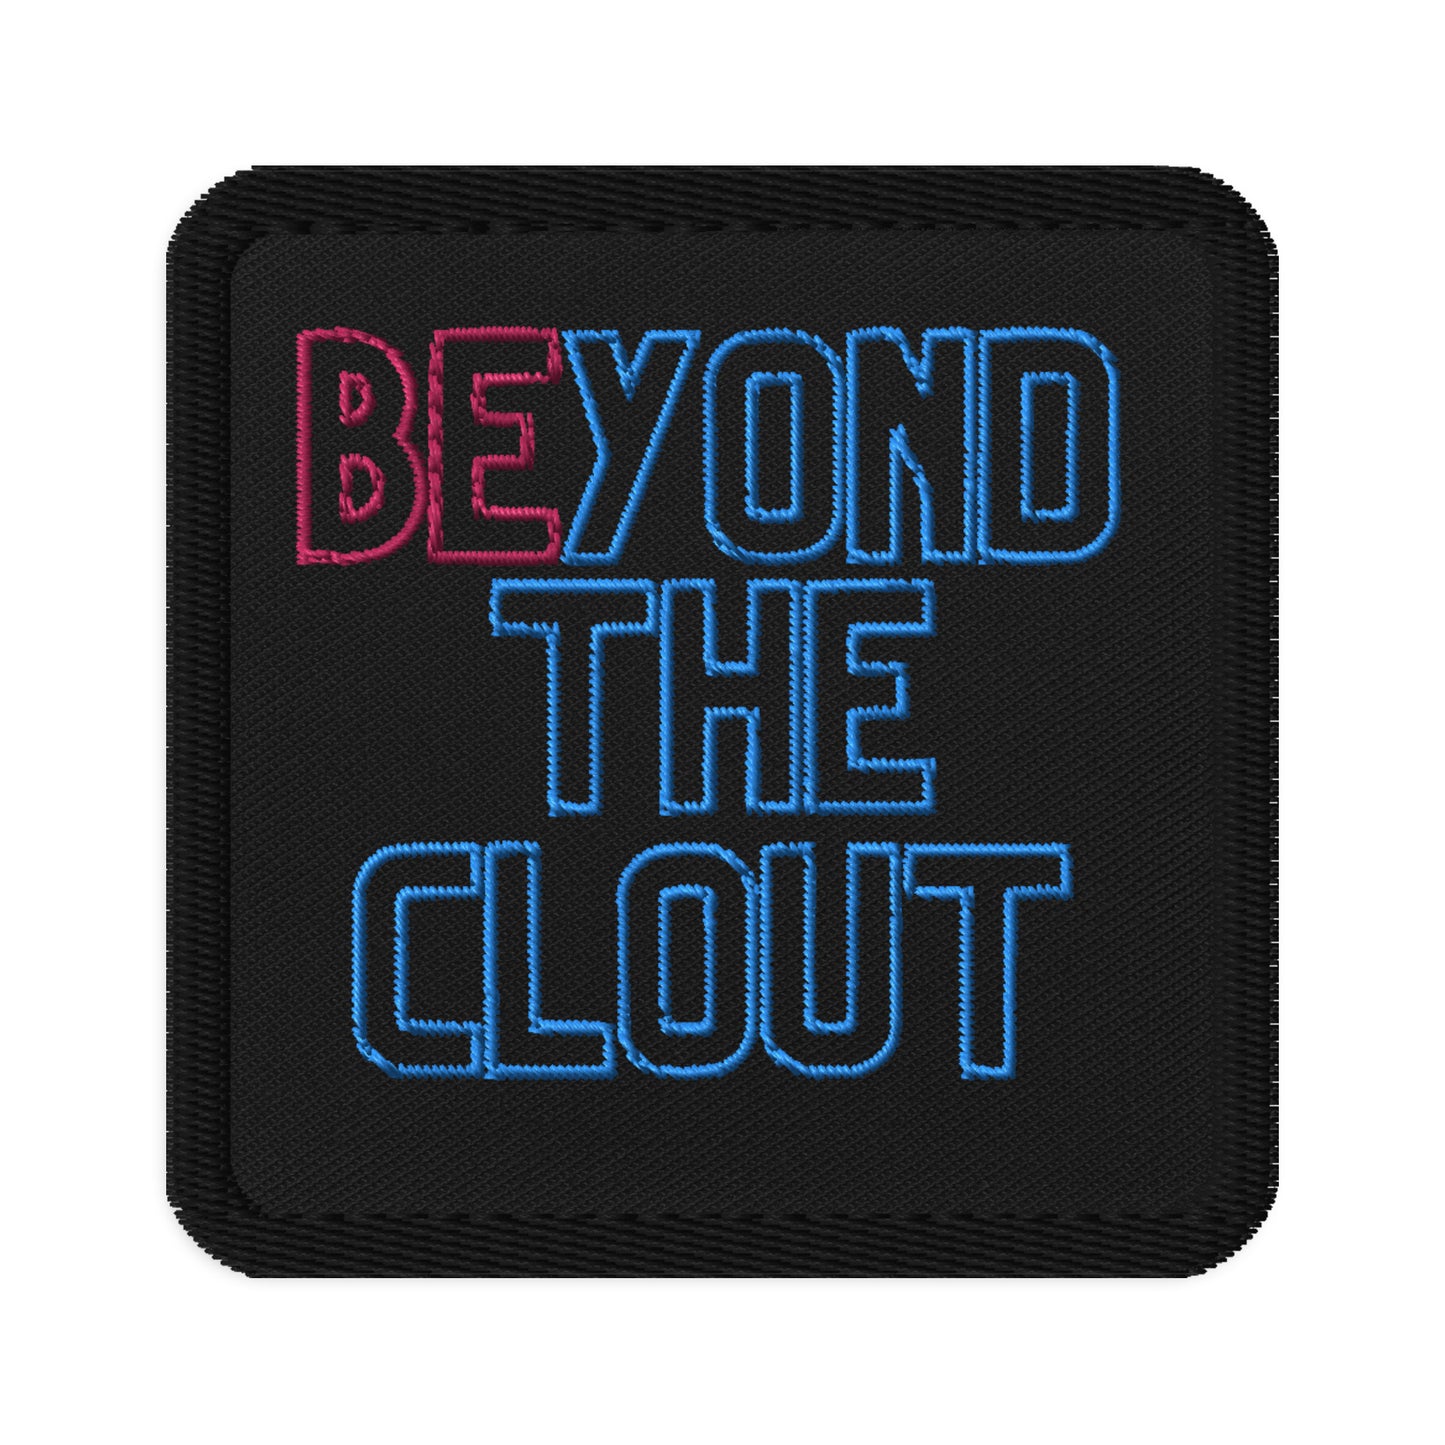 BEyond Embroidered patch